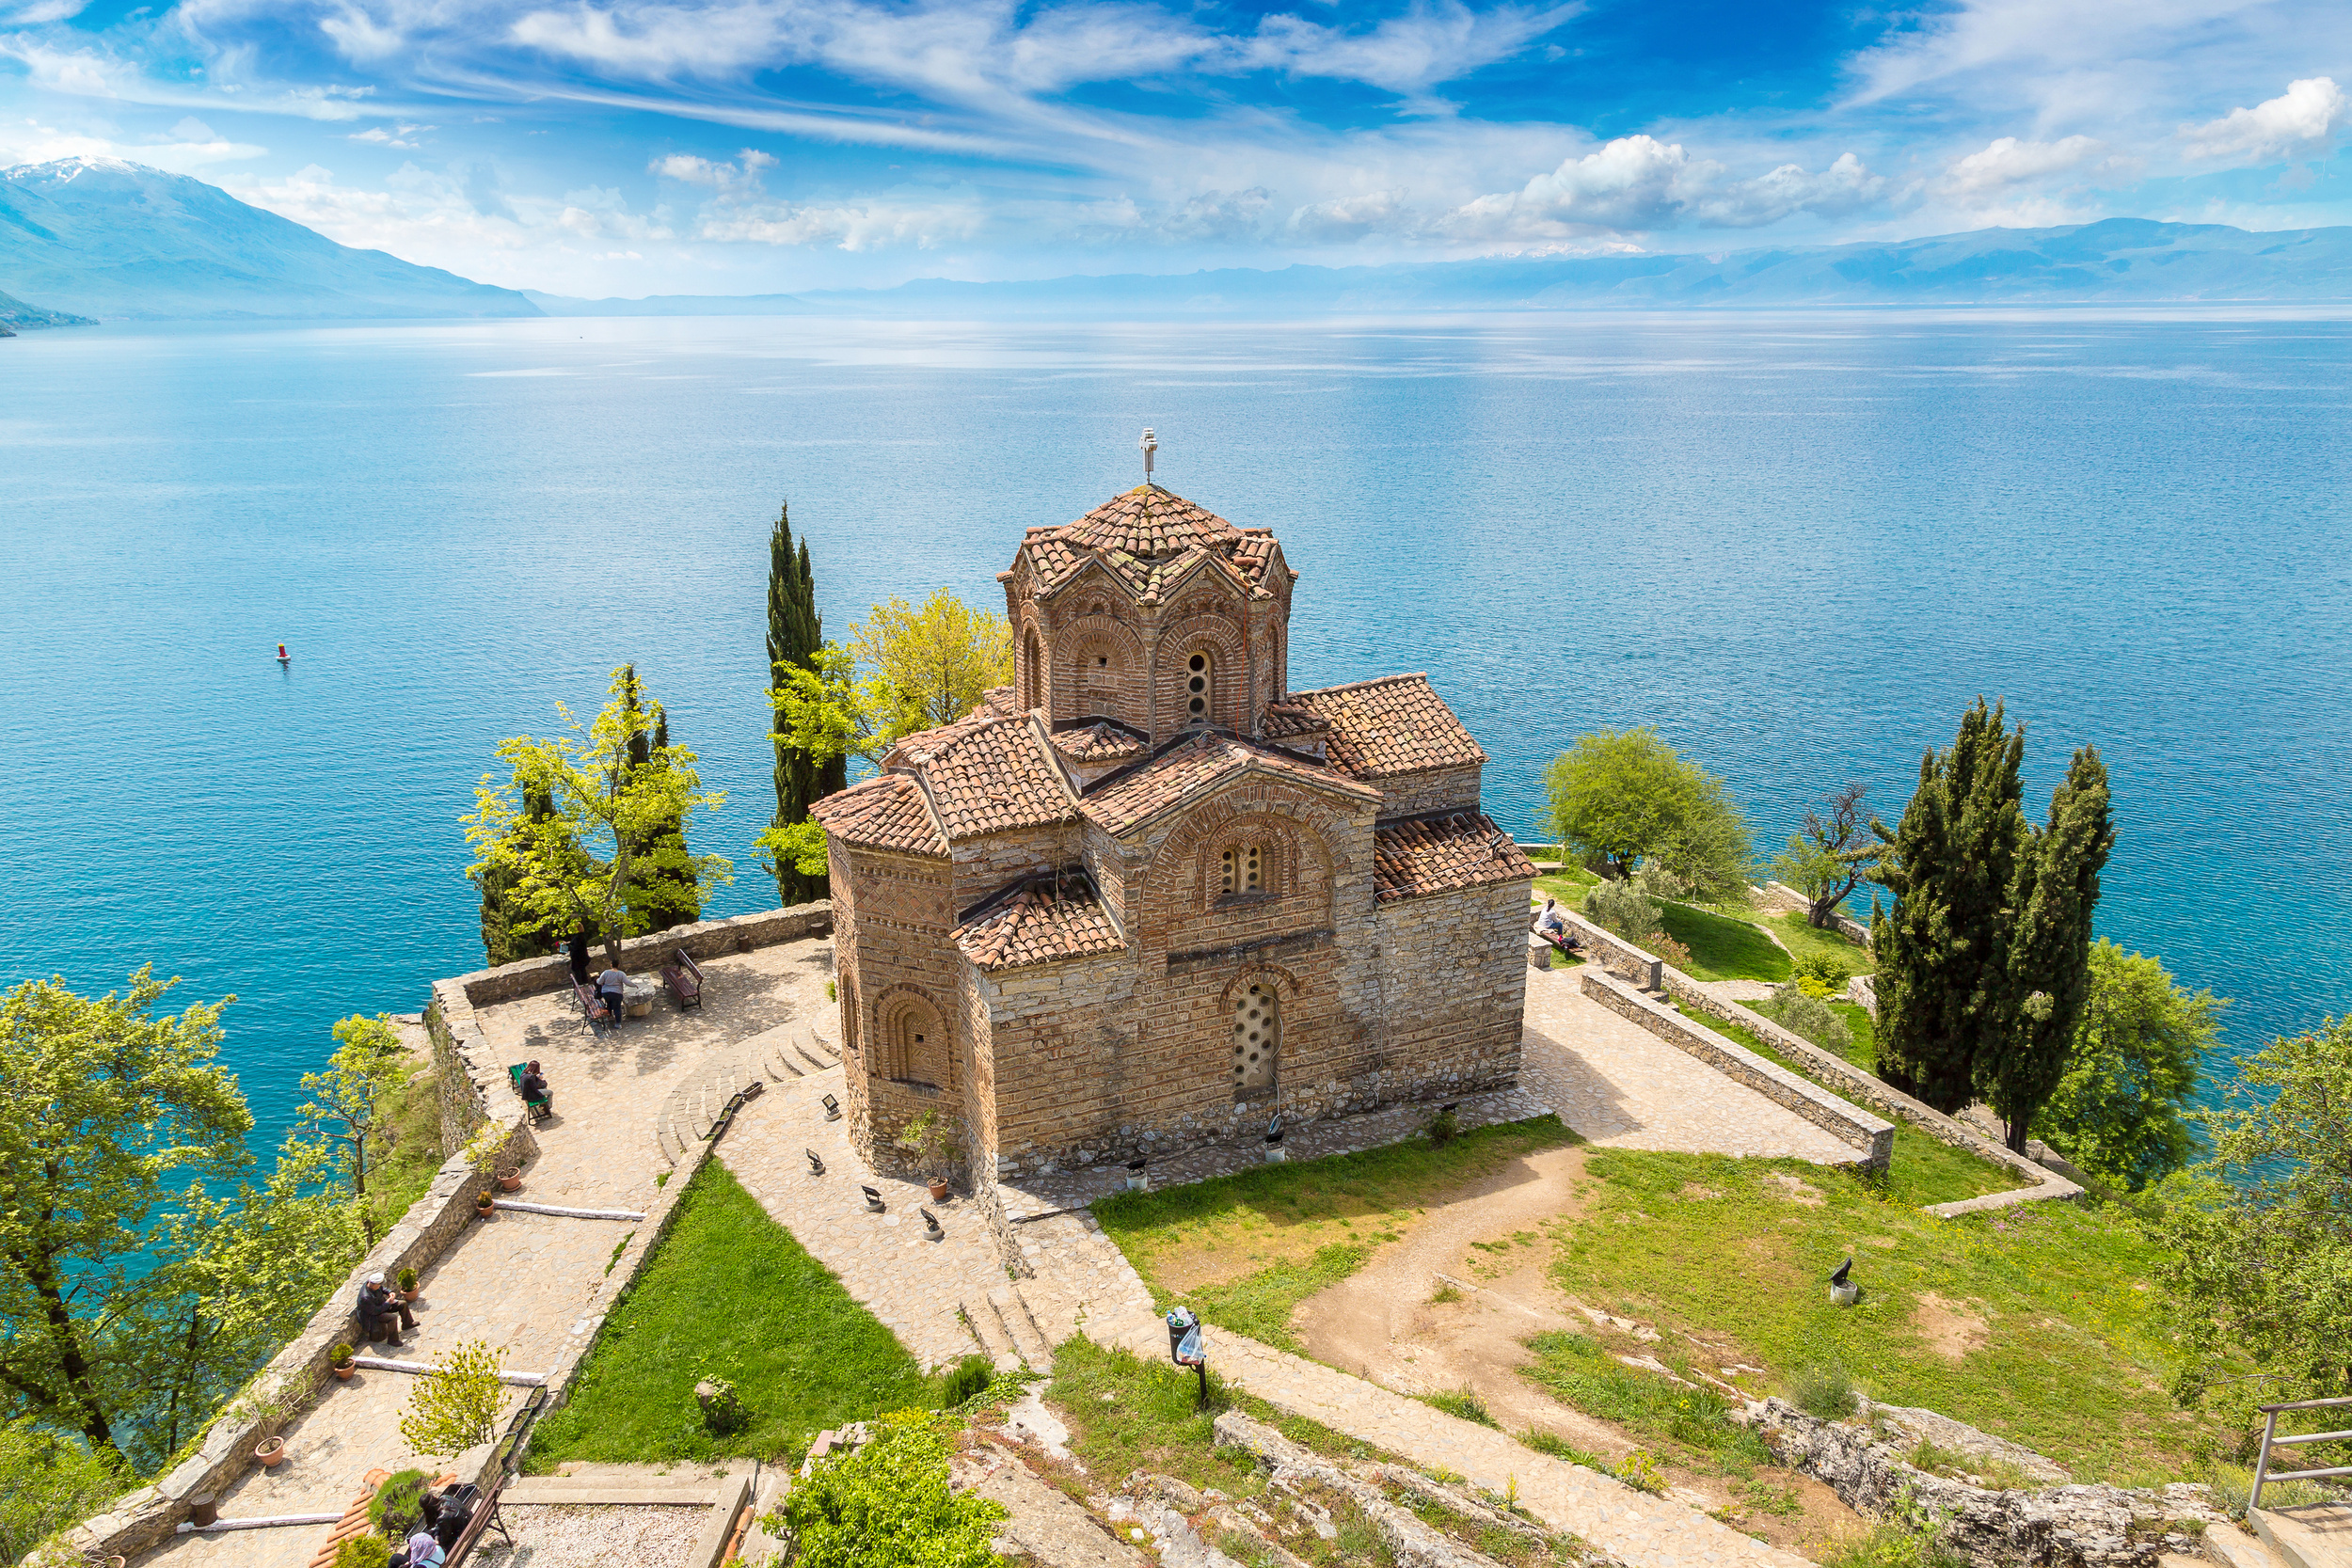 <p>A true Balkan gem, the 138-square-mile lake is shared between Albania, Greece, and North Macedonia. However, it’s the Macedonian side that is the true beauty. Numerous villas and lakeside accommodations dot the shores, along with the UNESCO Saint Naum Monastery and a charming Old Town.</p><p><a href='https://www.msn.com/en-us/community/channel/vid-cj9pqbr0vn9in2b6ddcd8sfgpfq6x6utp44fssrv6mc2gtybw0us'>Follow us on MSN to see more of our exclusive lifestyle content.</a></p>